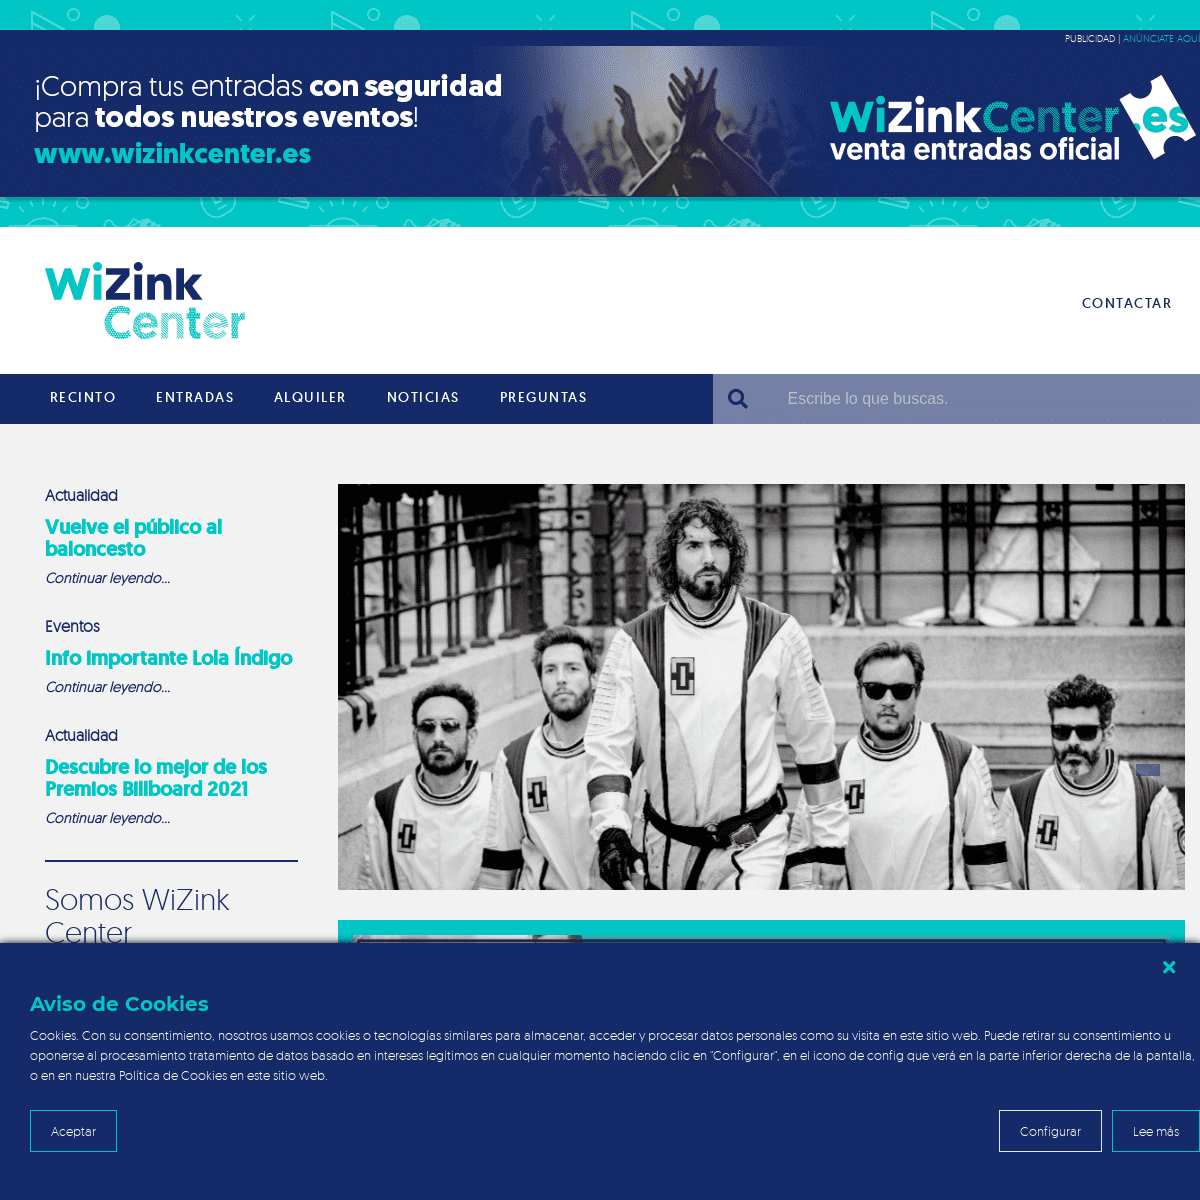 A complete backup of https://wizinkcenter.es